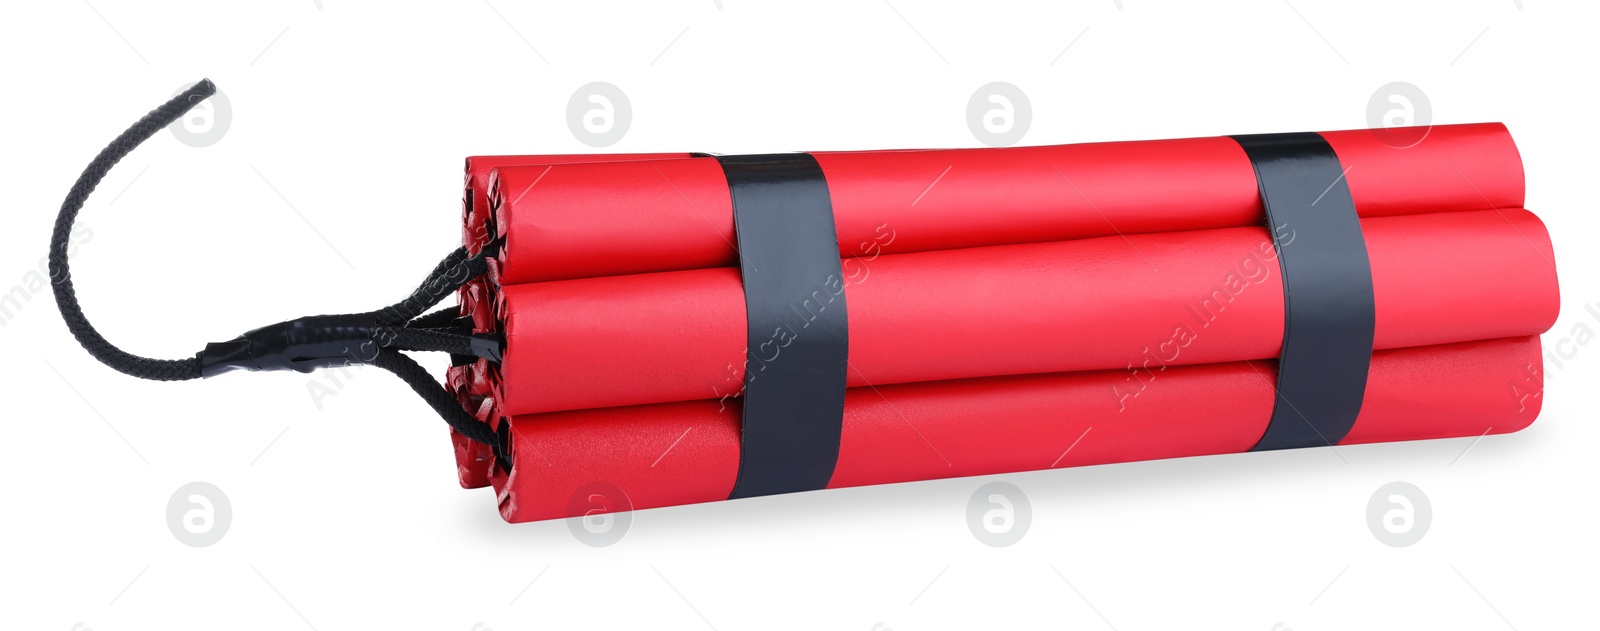 Photo of Red explosive dynamite bomb on white background